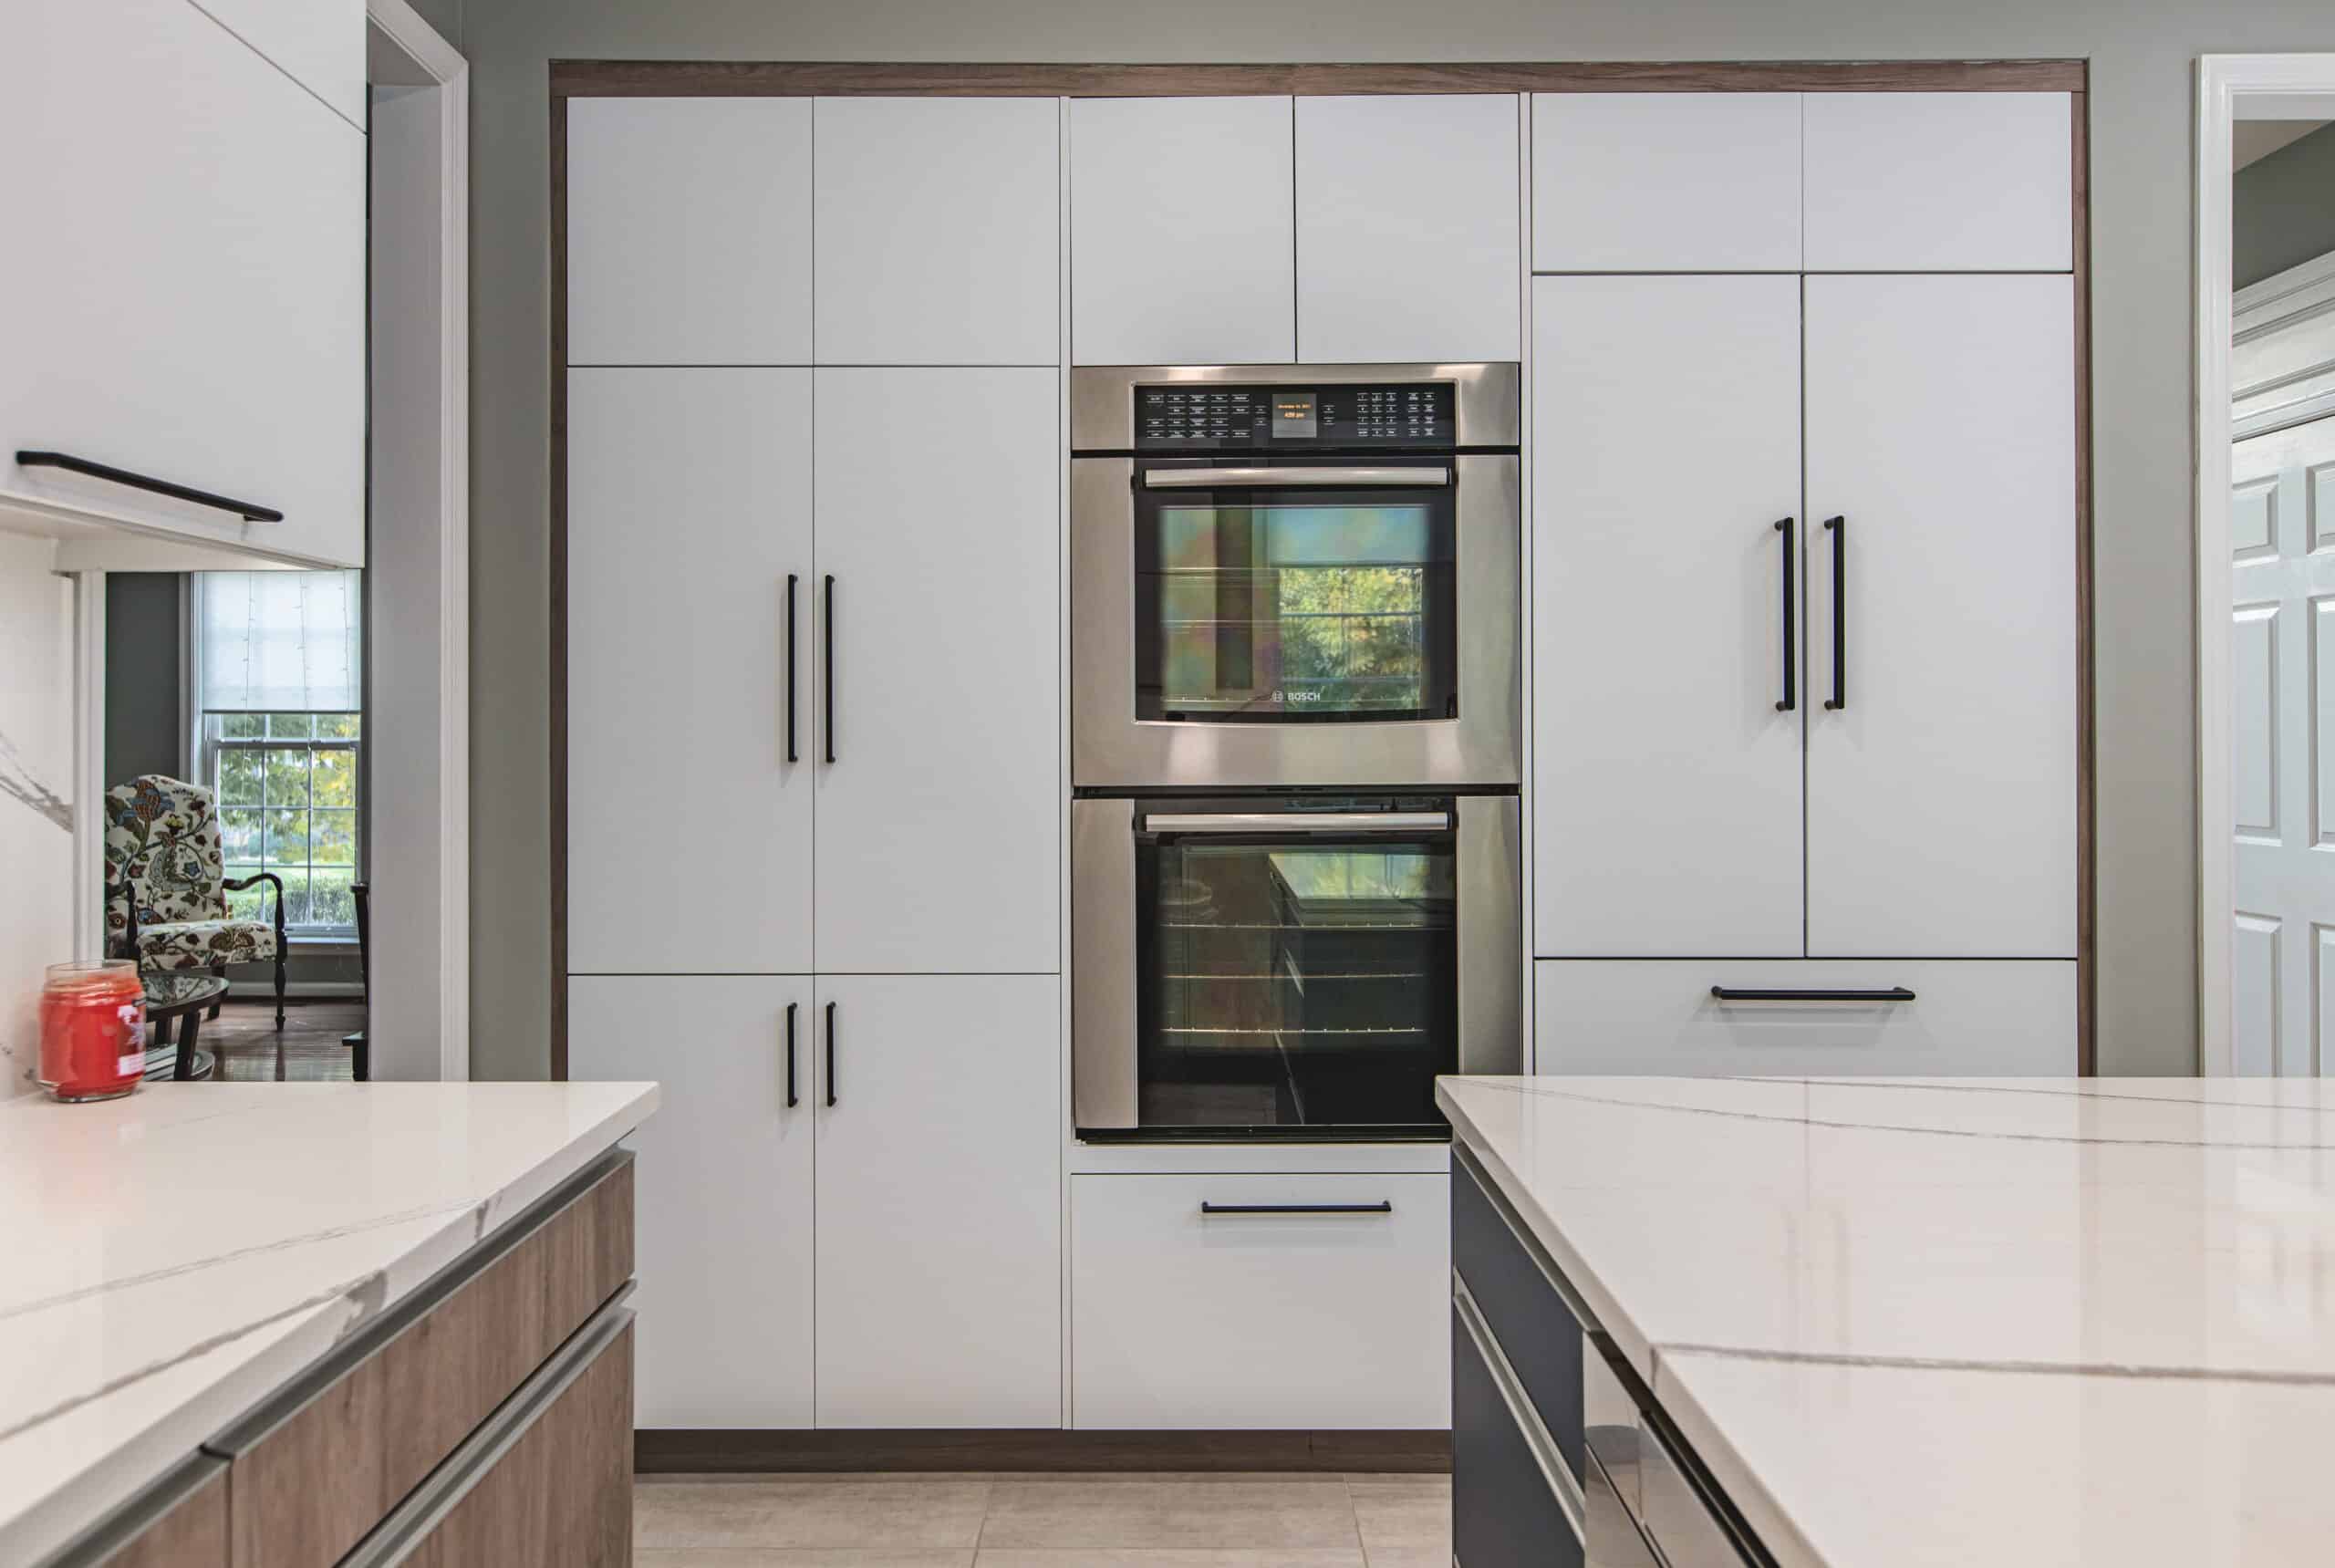 A modern kitchen with sleek stainless steel appliances and pristine white cabinets